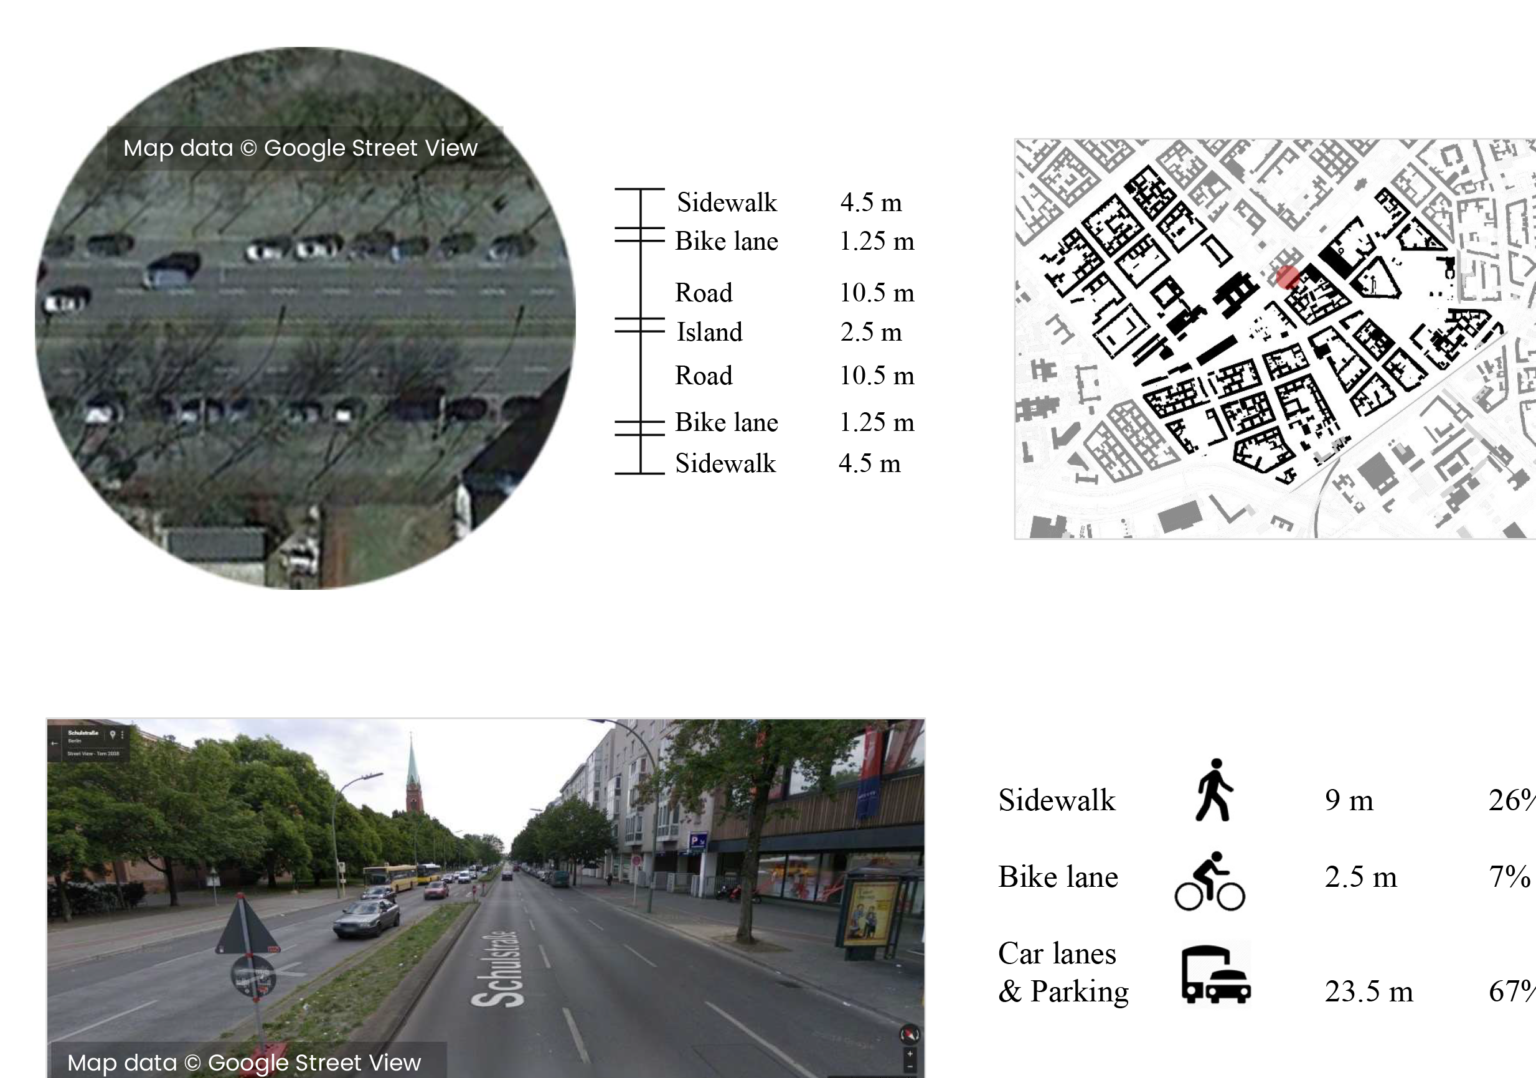 Street space allocation for travel modes